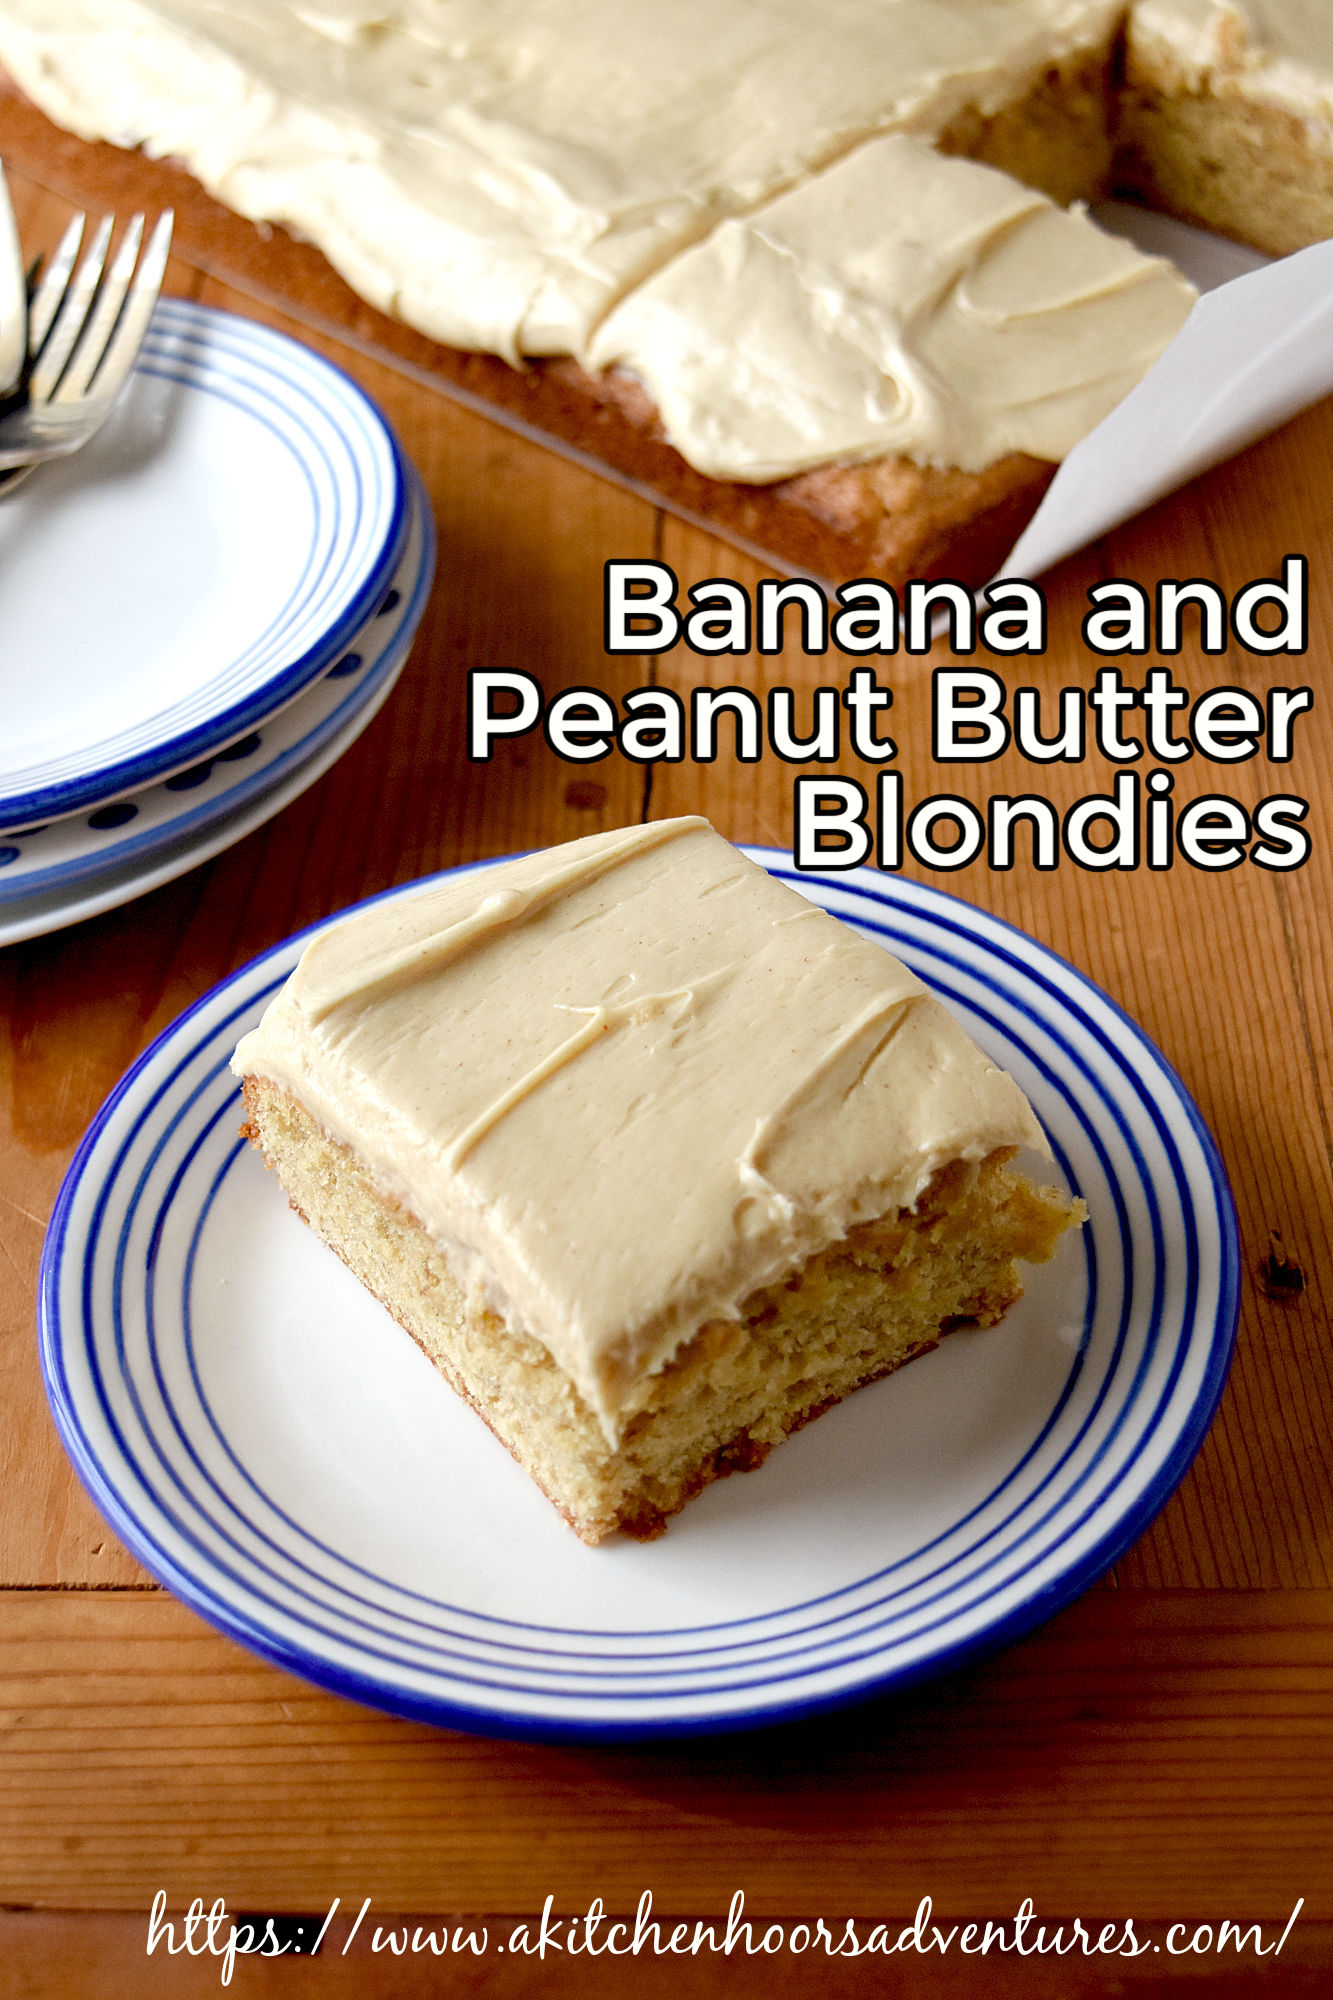 Peanut Butter and Banana Blondies are full of banana and peanut butter flavor. They’re a one bowl dessert that is easy to make! #OurFamilyTable